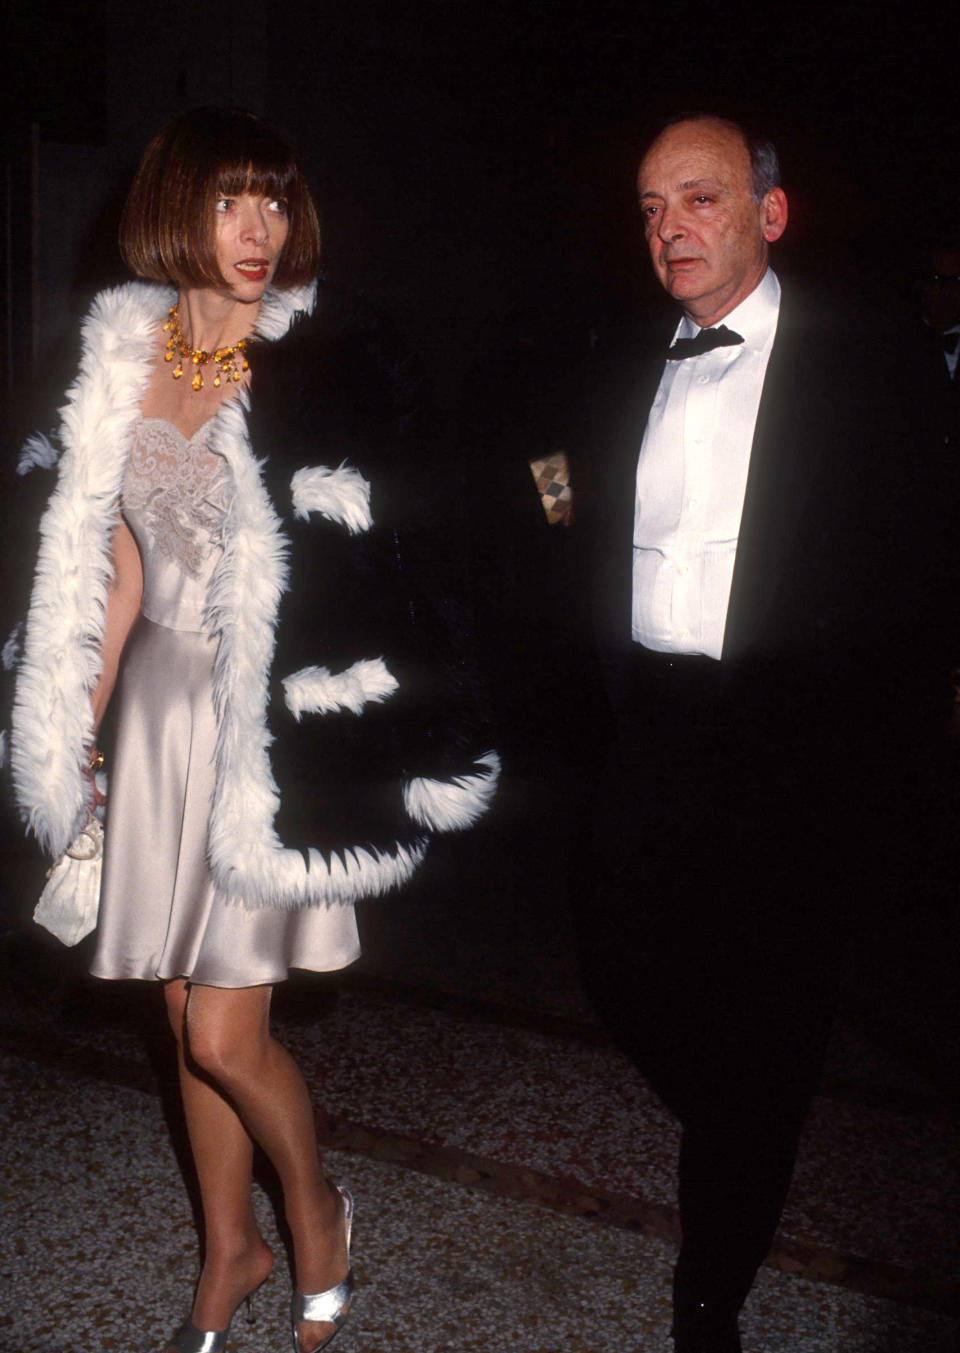 Anna Wintour pictured with David Shaffer at the Met Gala in 1994. (Getty Images) 